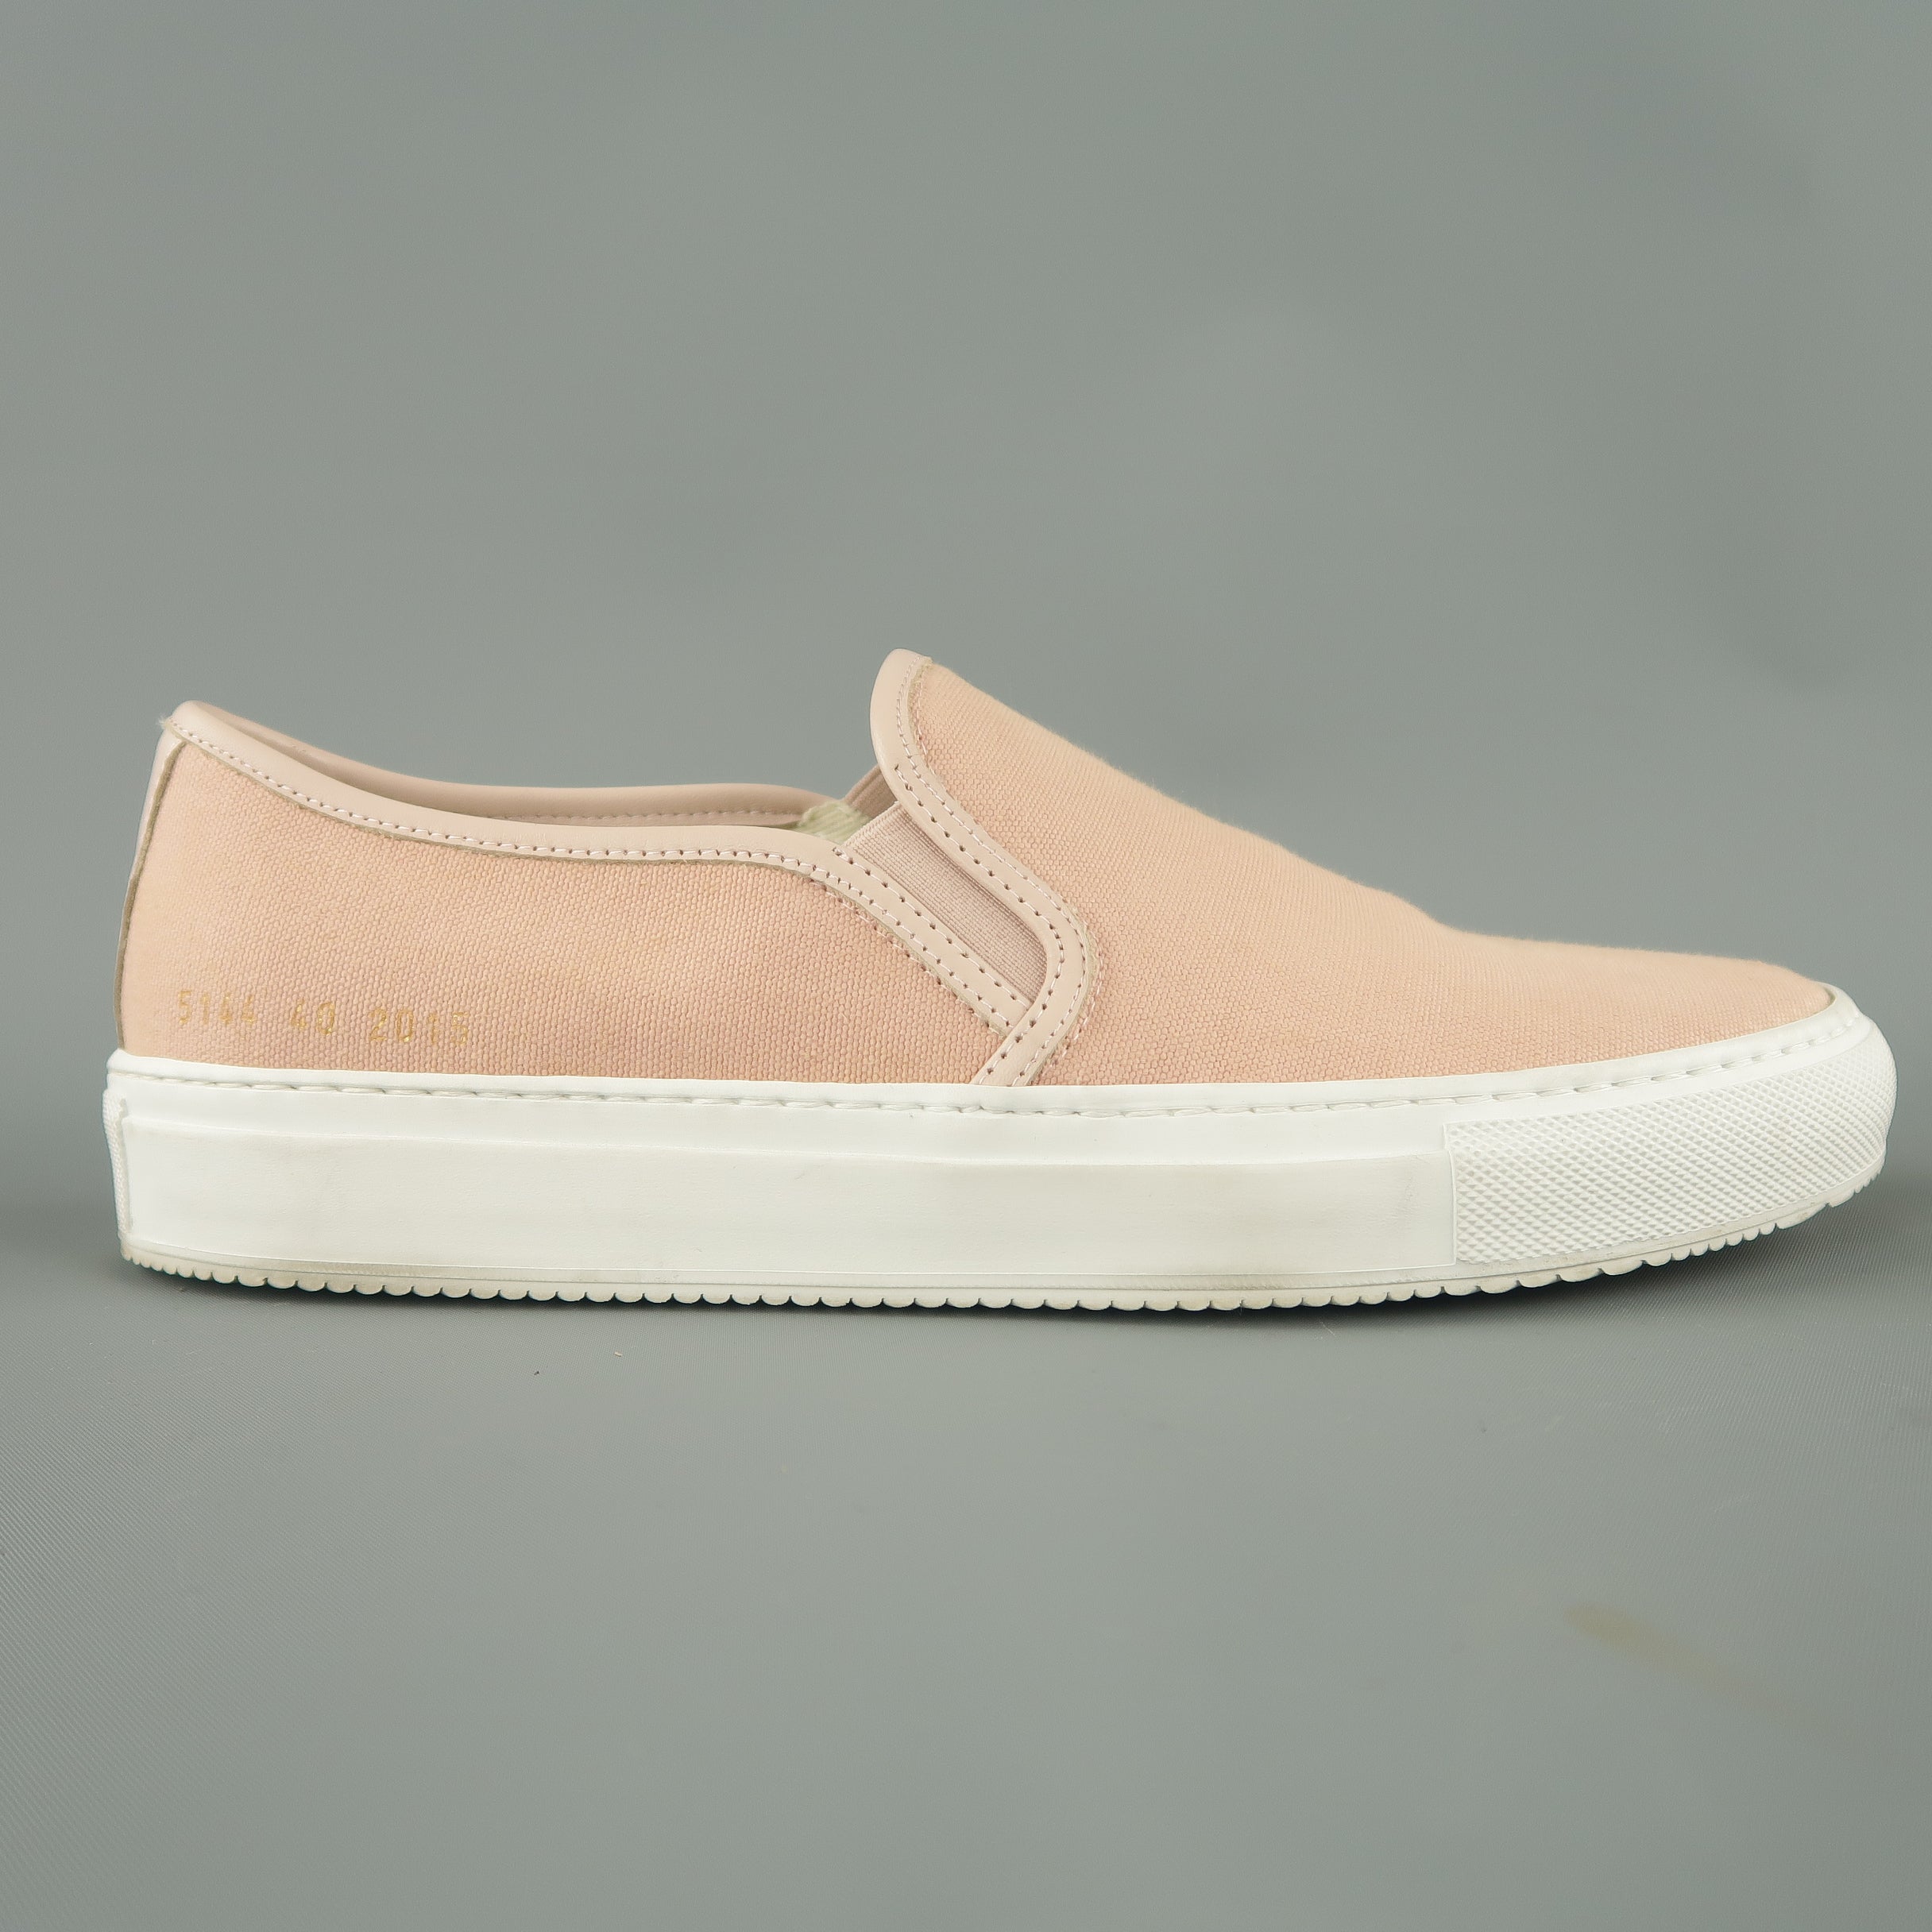 pink leather slip on sneakers